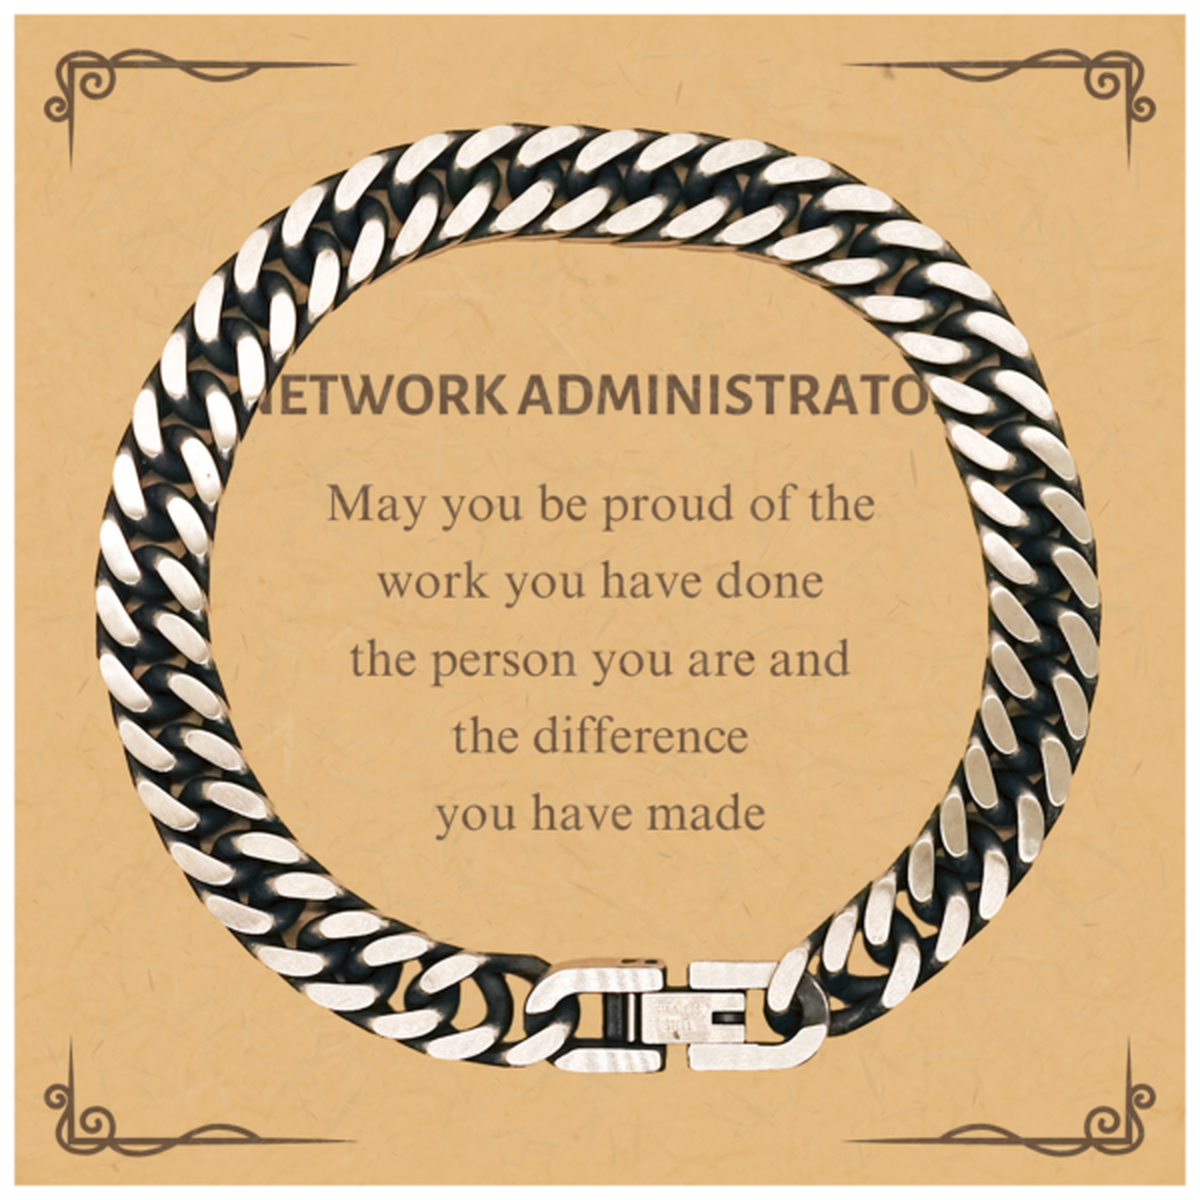 Network Administrator May you be proud of the work you have done, Retirement Network Administrator Cuban Link Chain Bracelet for Colleague Appreciation Gifts Amazing for Network Administrator